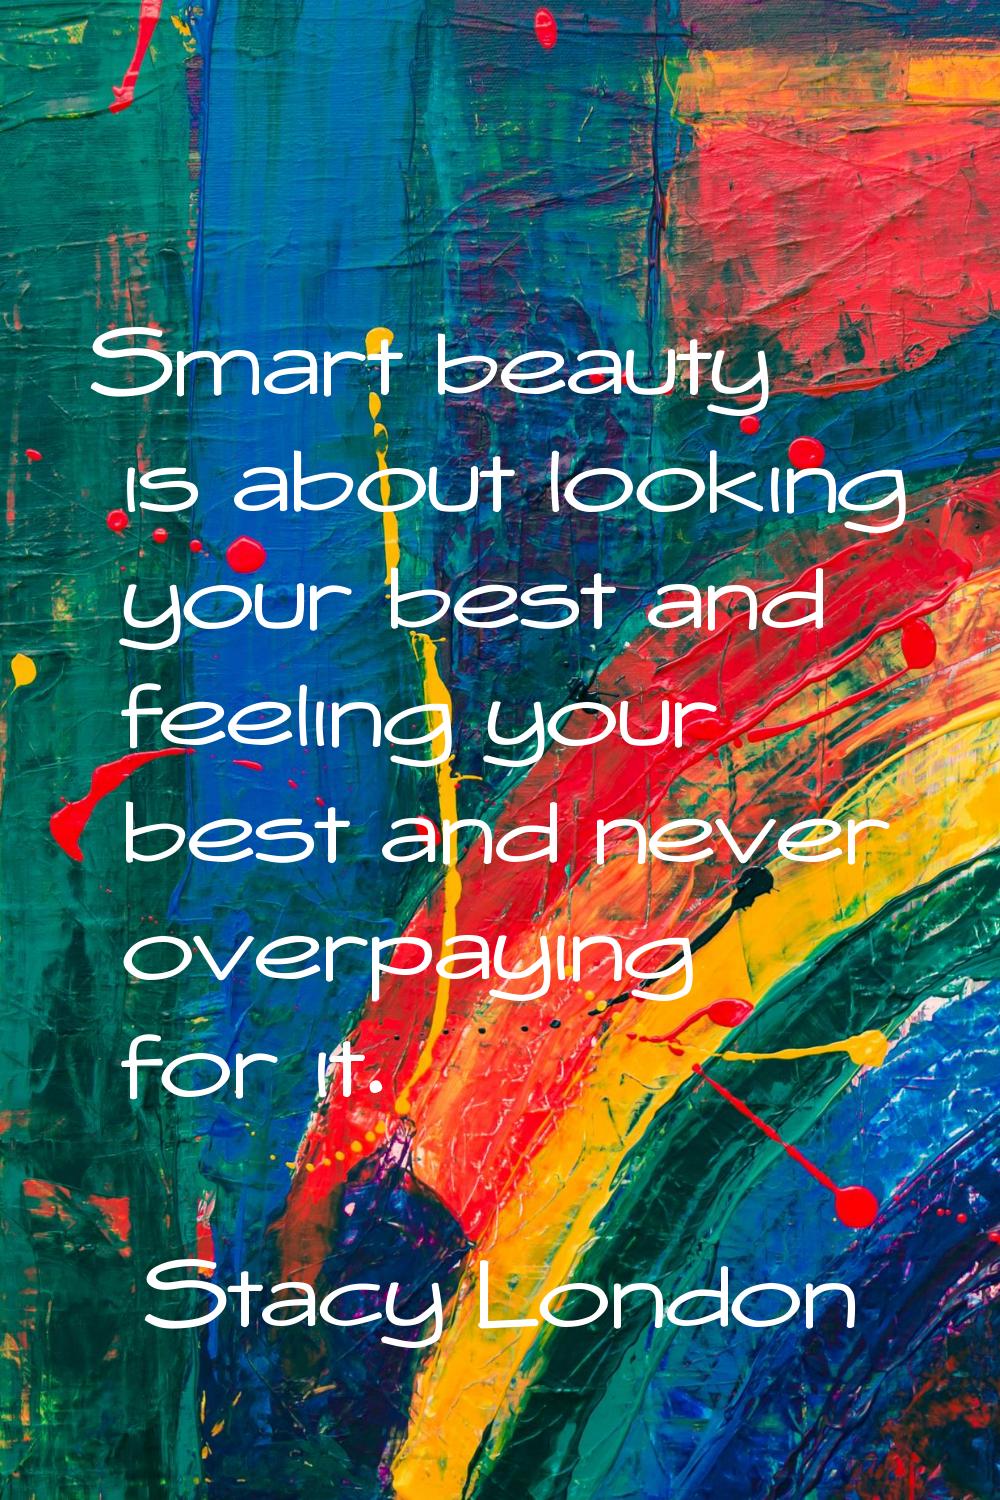 Smart beauty is about looking your best and feeling your best and never overpaying for it.